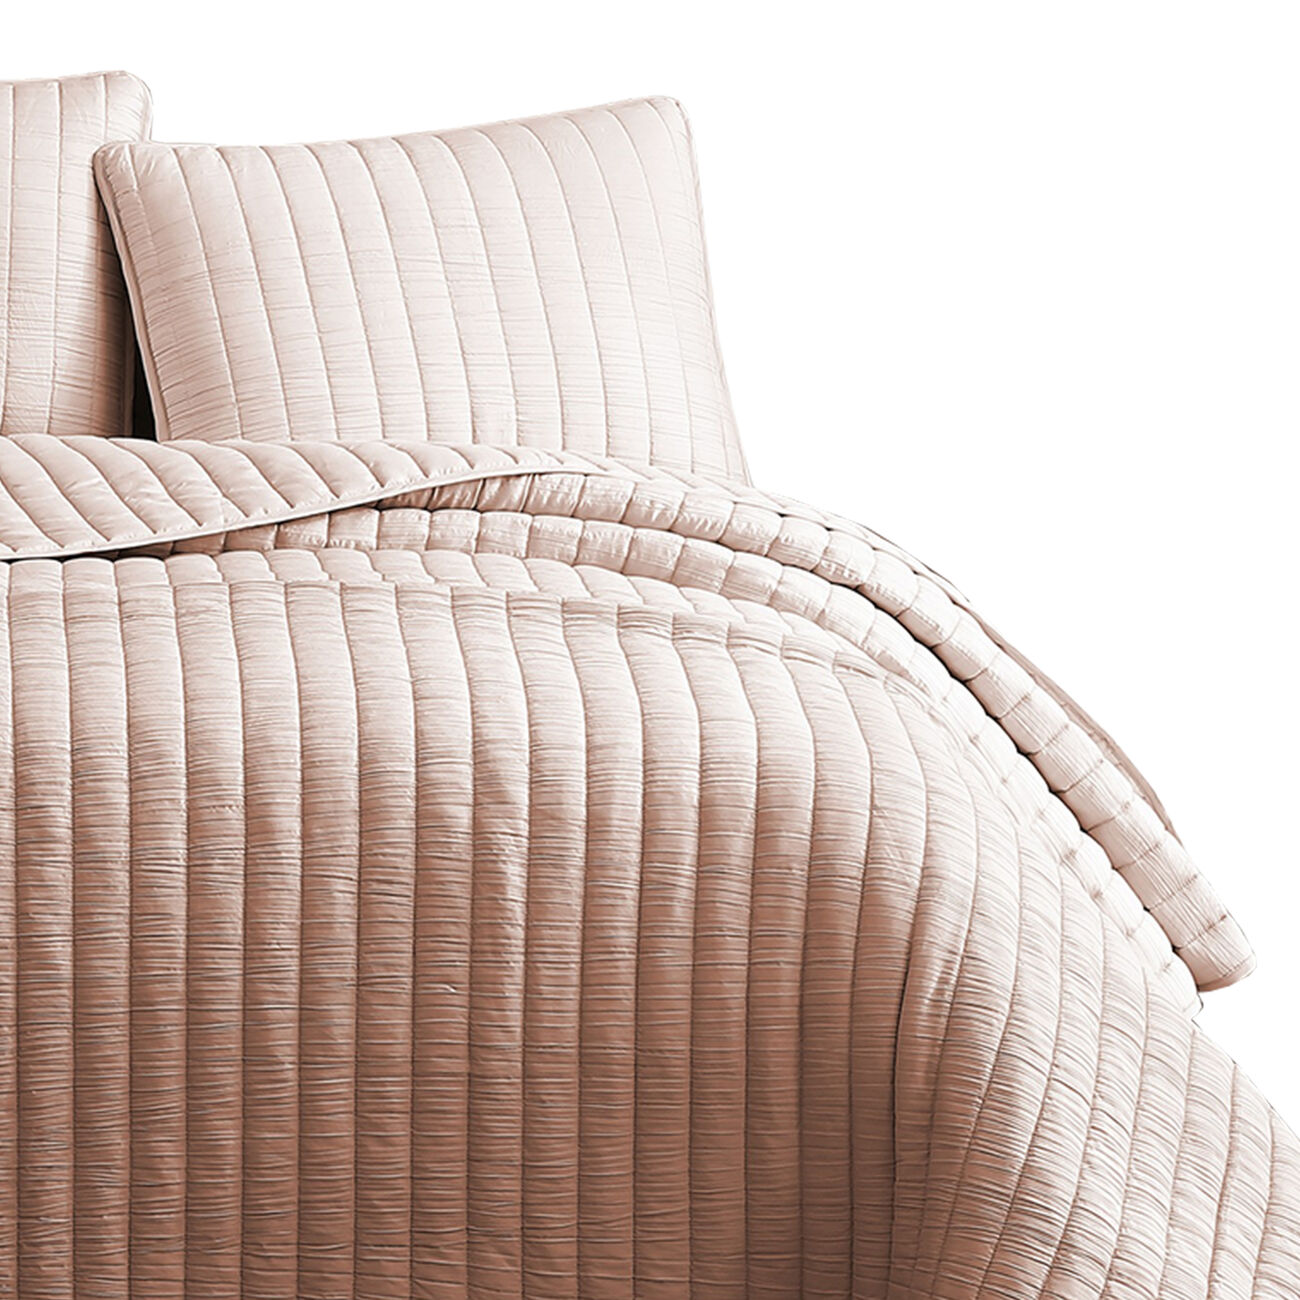 3 Piece Crinkles King Size Coverlet Set with Vertical Stitching, Pink